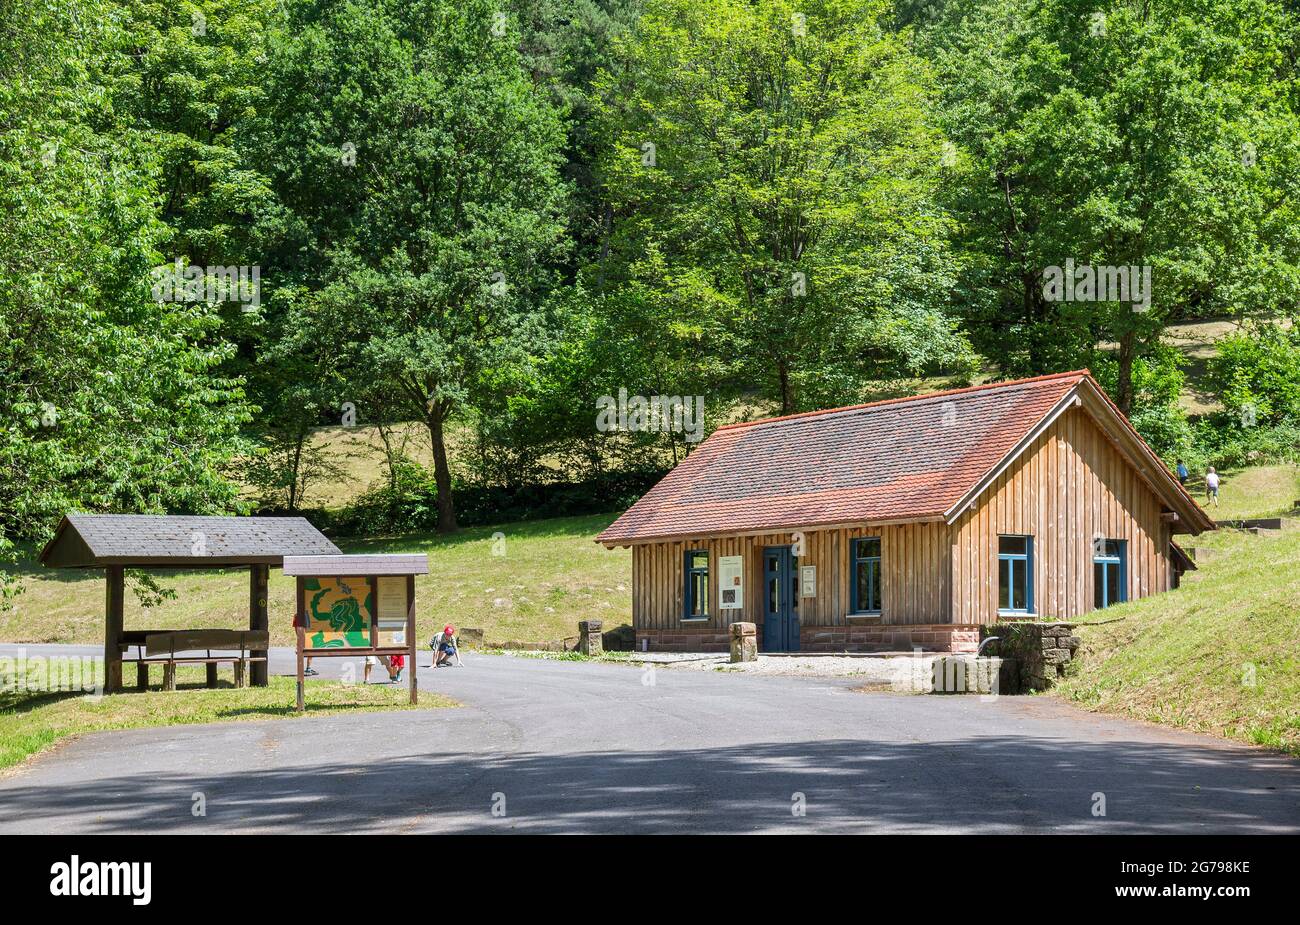 Germany, Hessen, Rothenberg. The new exhibition building of the Rothenberger water reservoir at the new location in the Finkenbachtal near the Hämerichsbrunnen replaces the old pump house, whose pump system can be viewed here after extensive restoration. Stock Photo